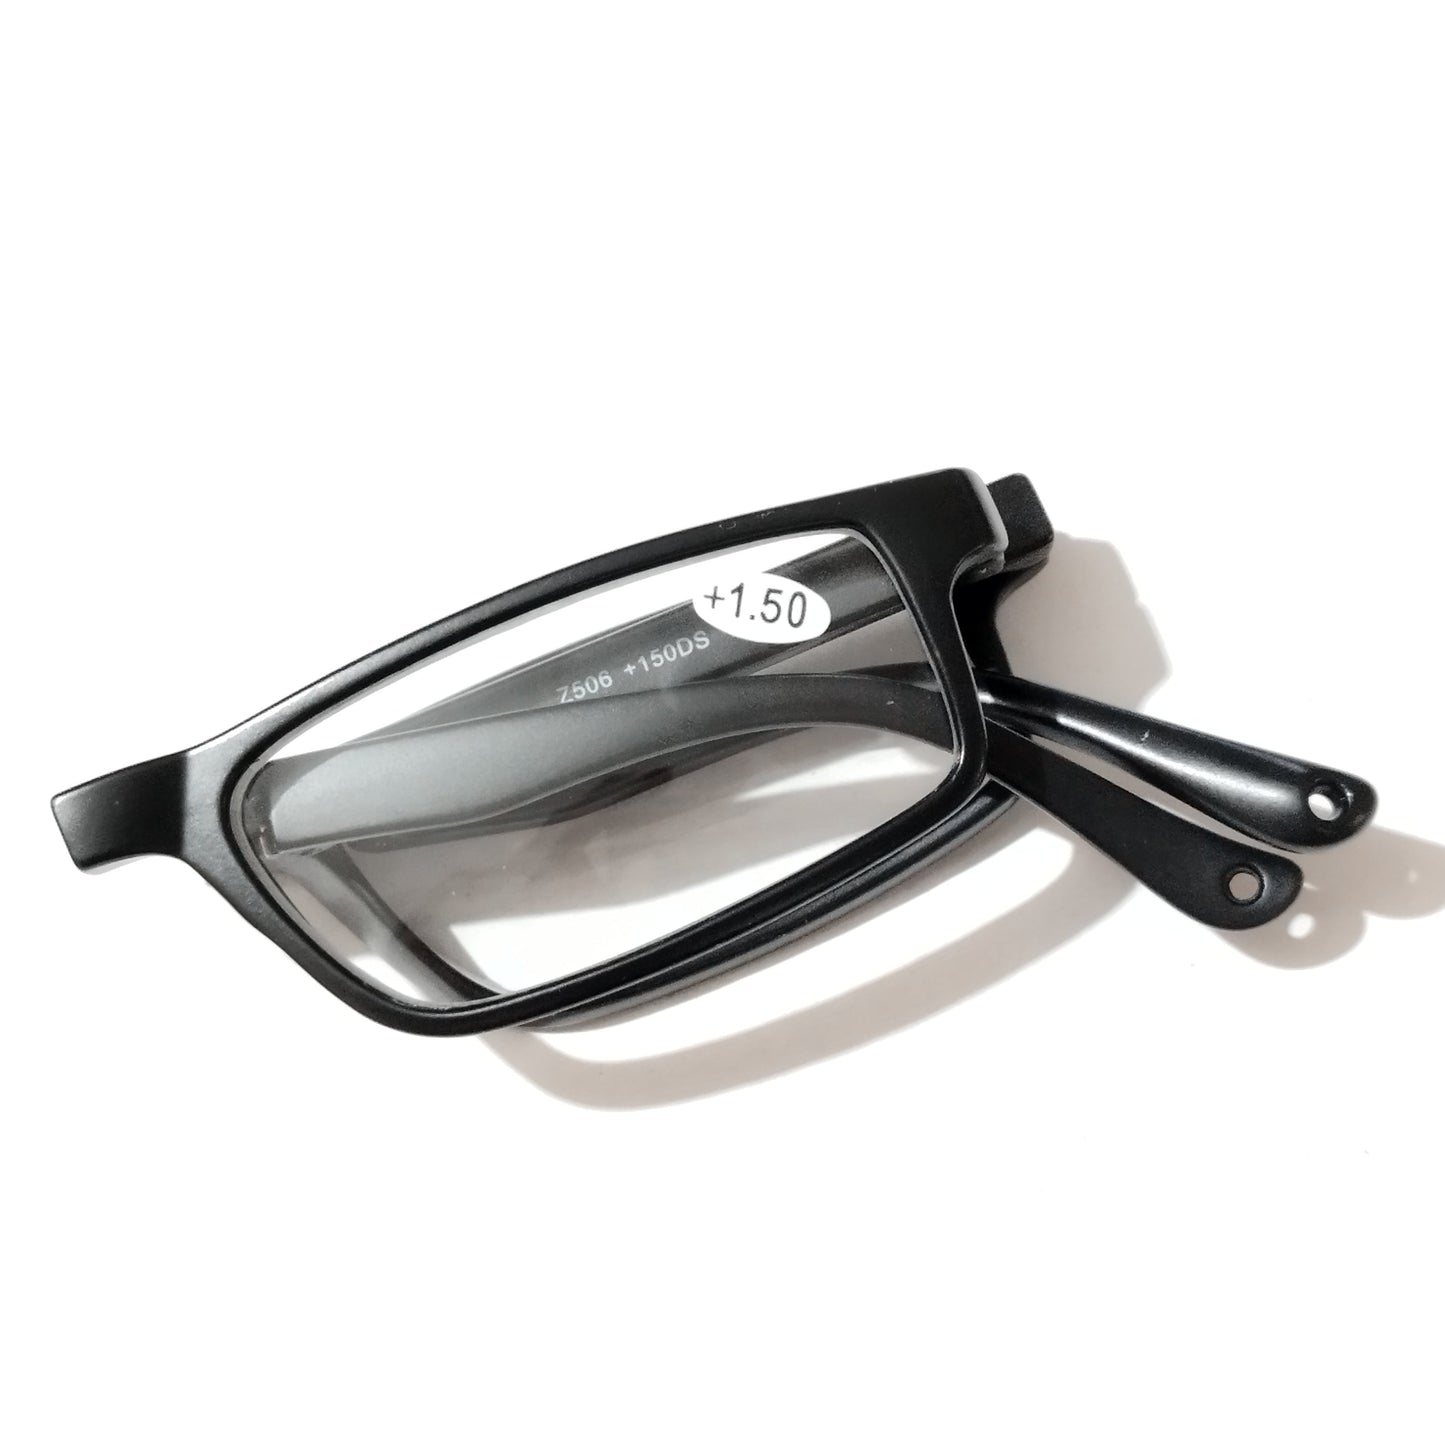 Rectangle Folding Reading Glasses with zip pouch